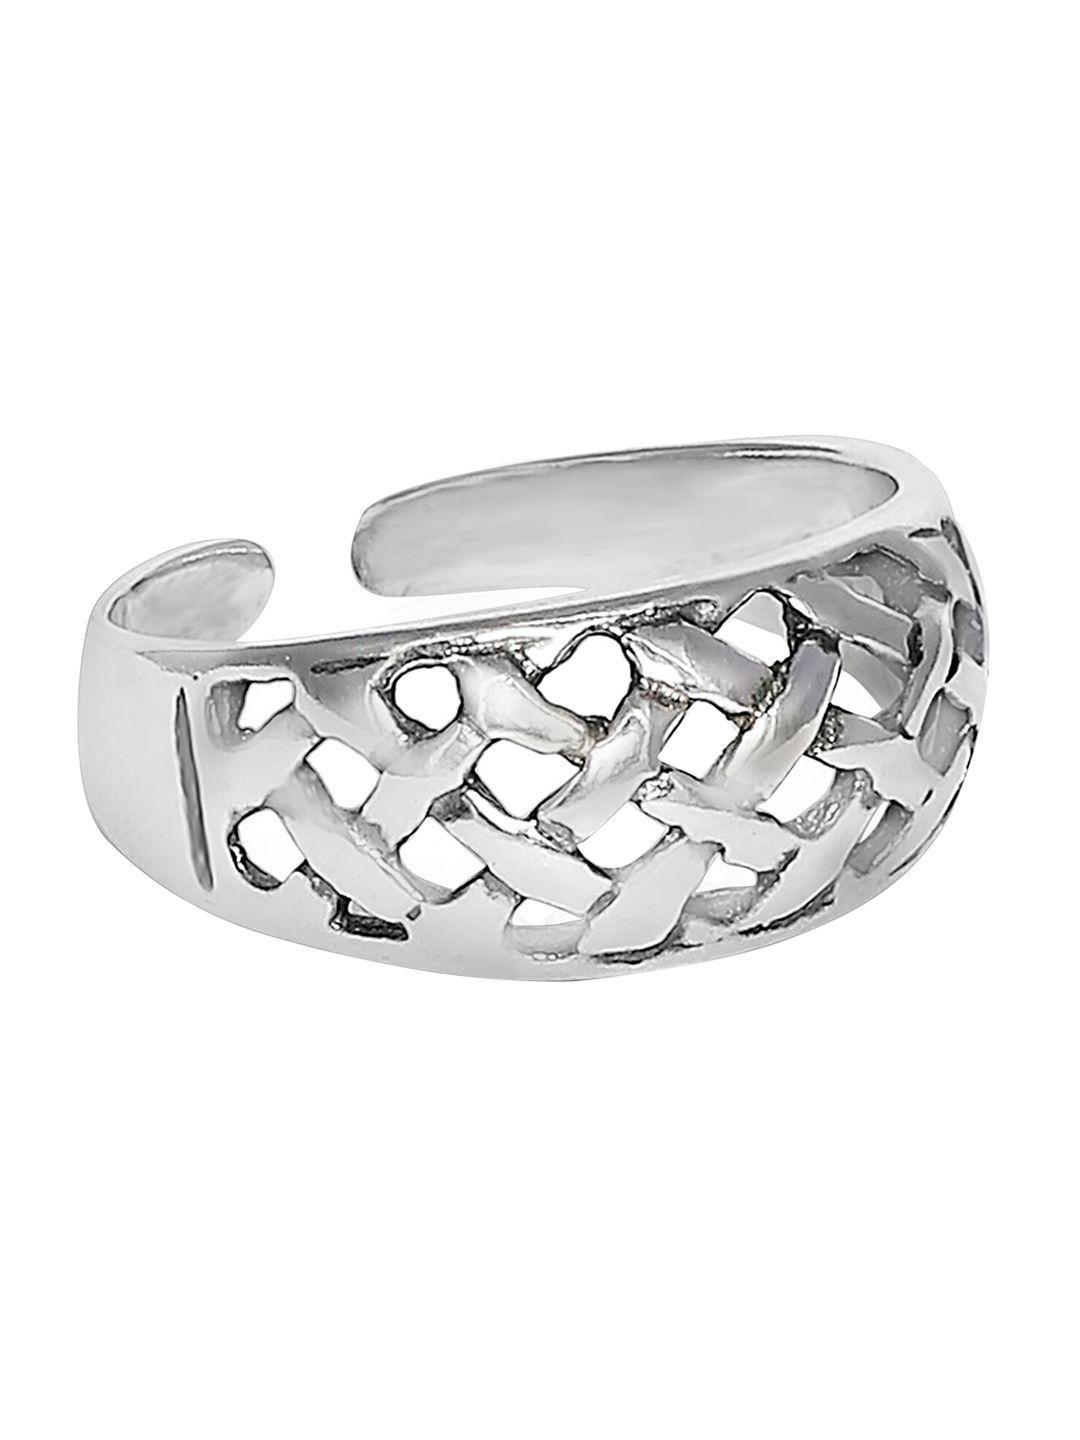 ahilya women 92.5 sterling silver-plated criss cross toe rings